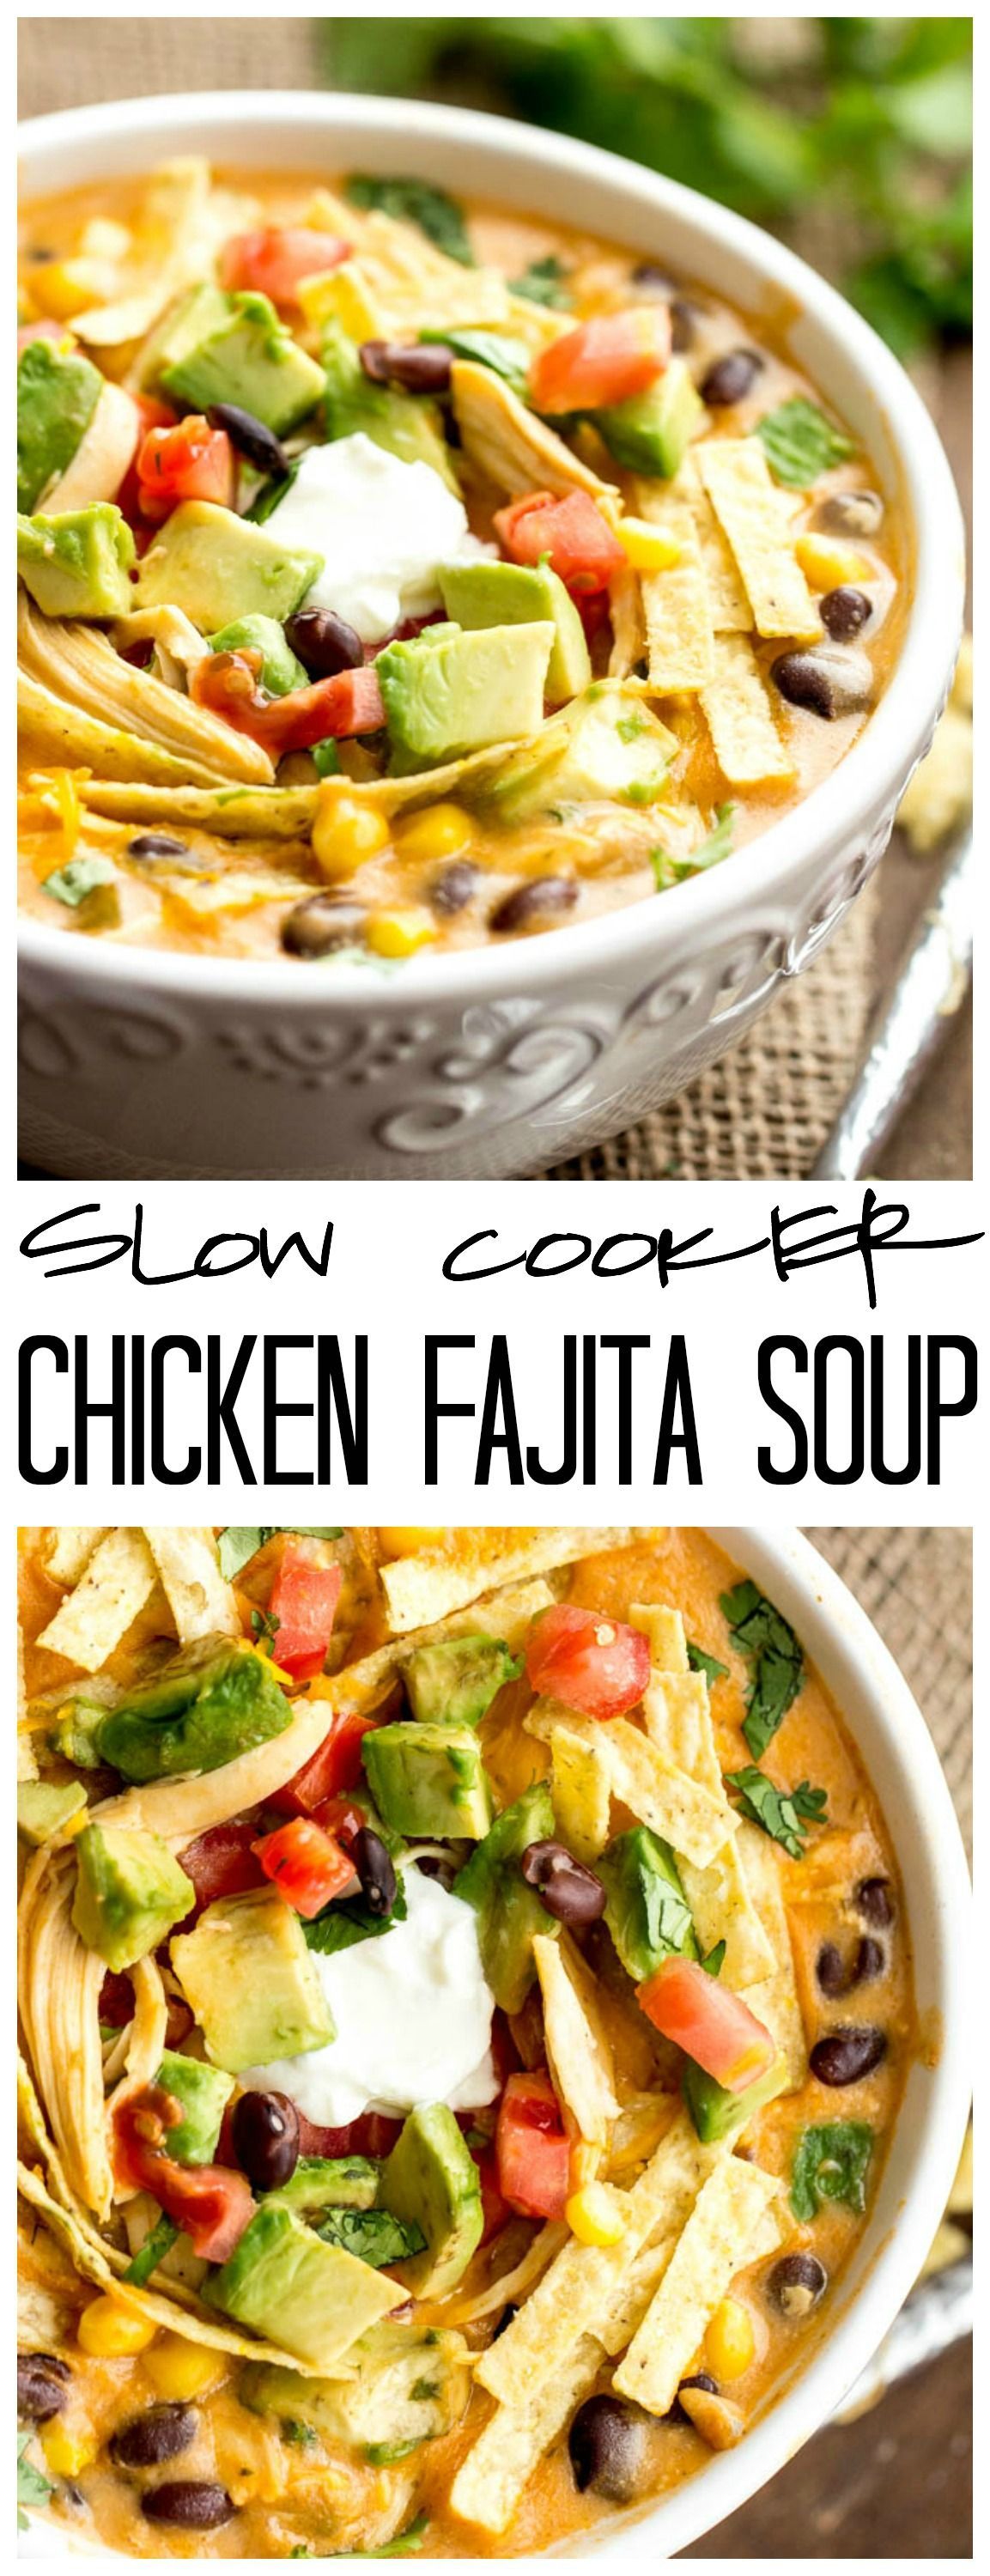 This Slow Cooker Chicken Fajita Soup takes 5 minutes to throw into the crockpot and will be the best and c